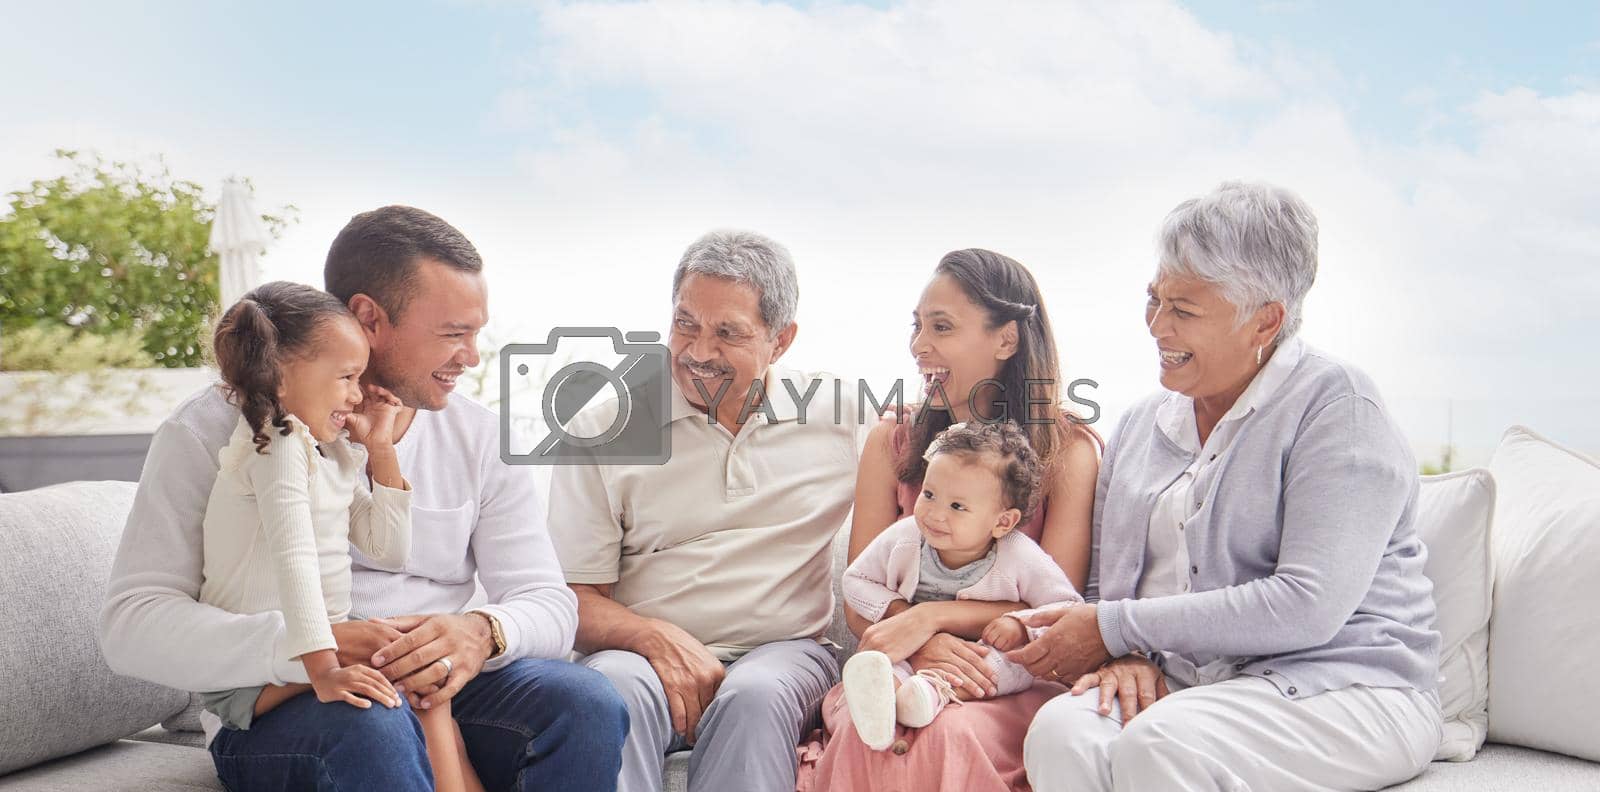 Happy family with children and grandparents talking, communication and conversation on couch outdoor in family home. Big family of elderly retirement people, love and young kids smile together.